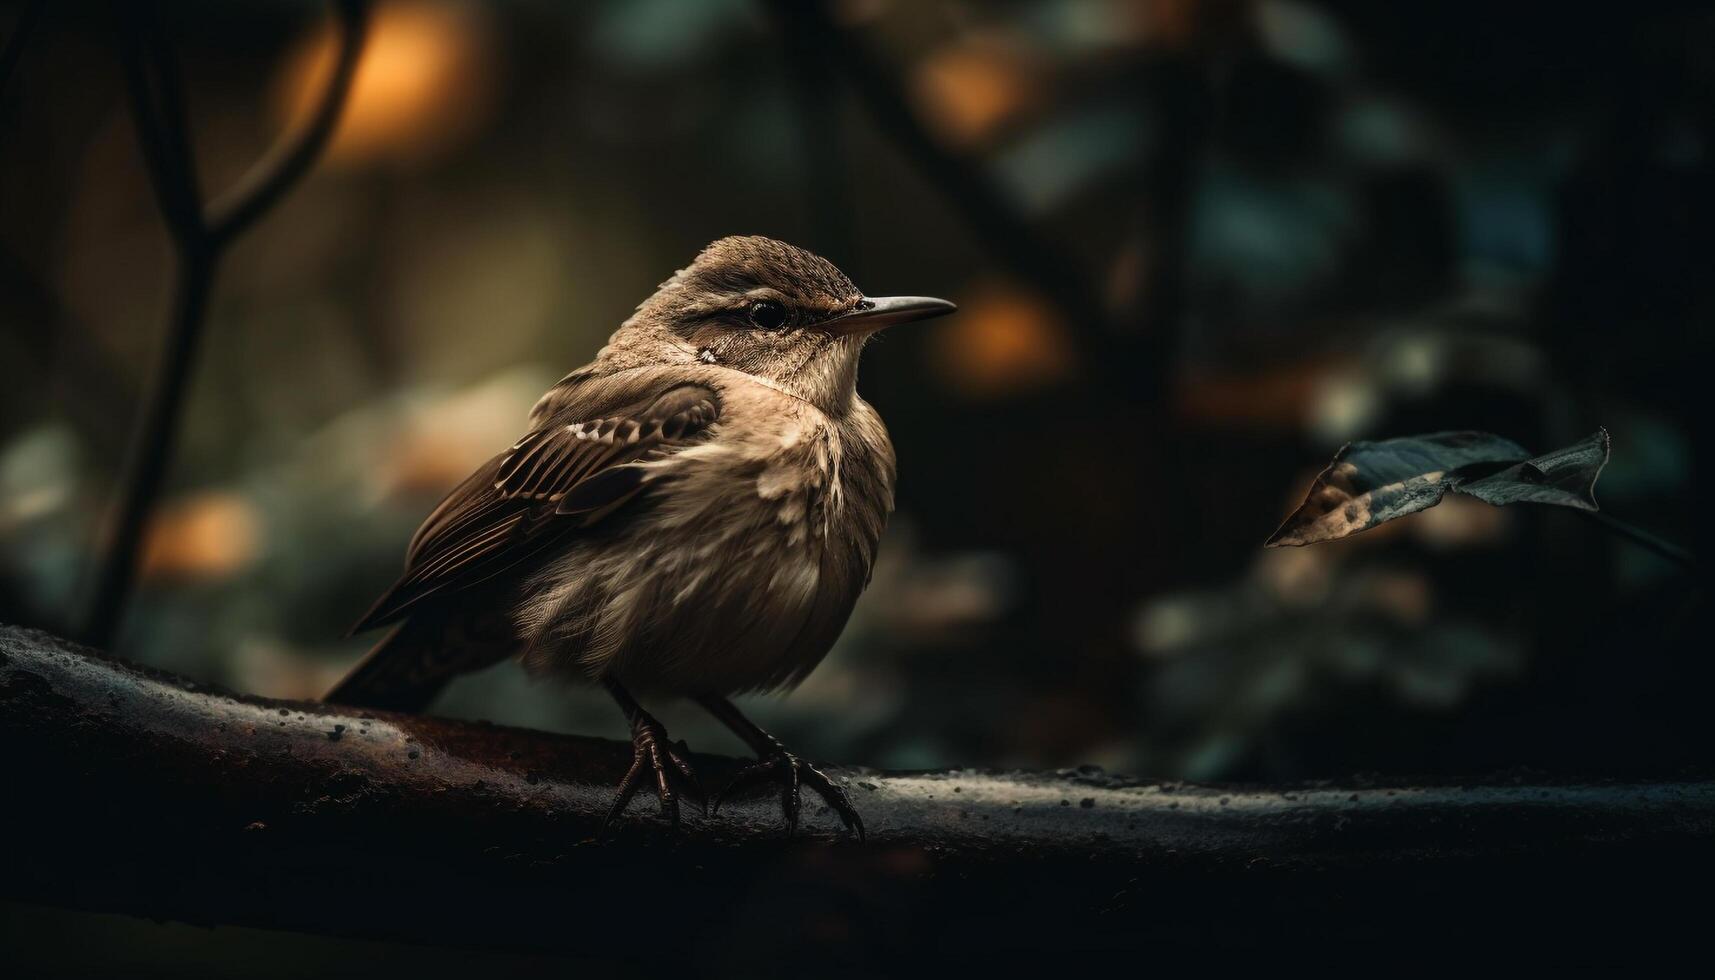 Small bird perching on branch, close up portrait generated by AI photo